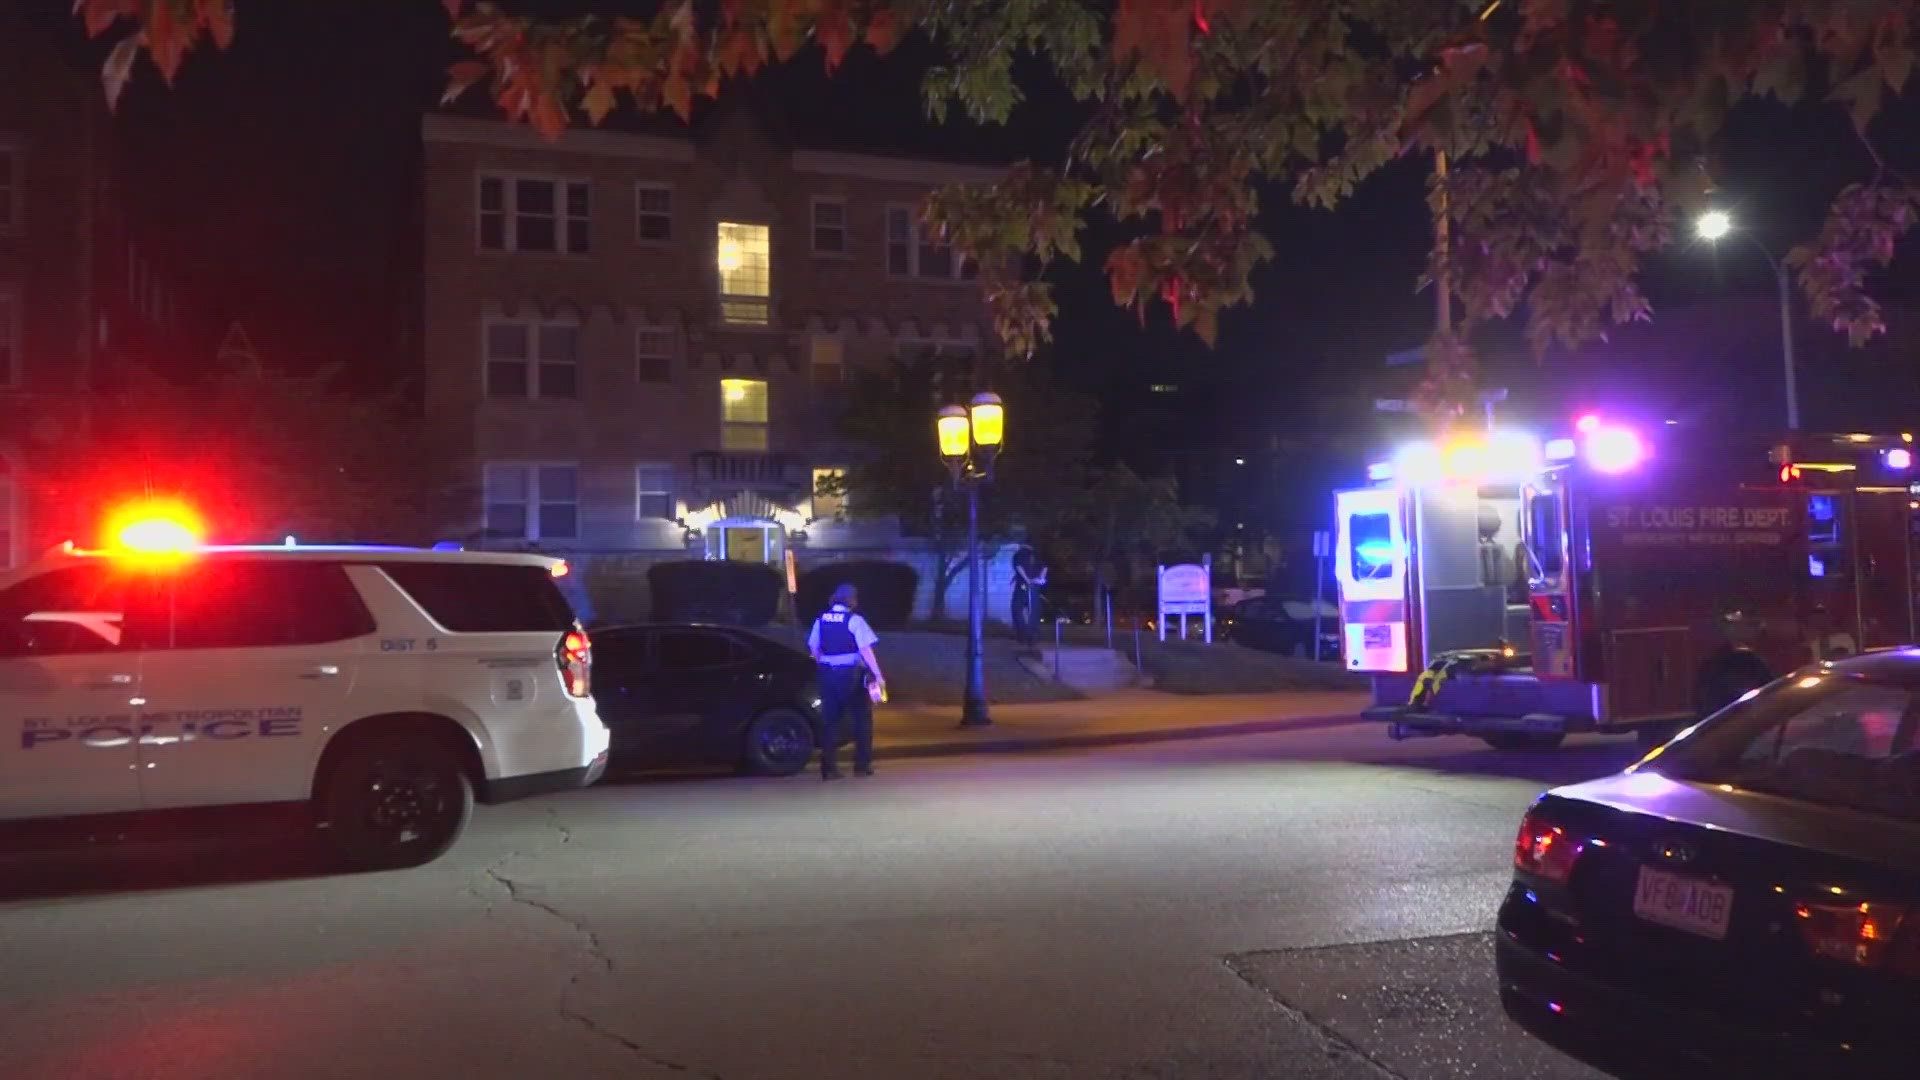 The deadly shooting happened just before midnight Monday at an apartment on West Pine Boulevard. The victim has not yet been identified.